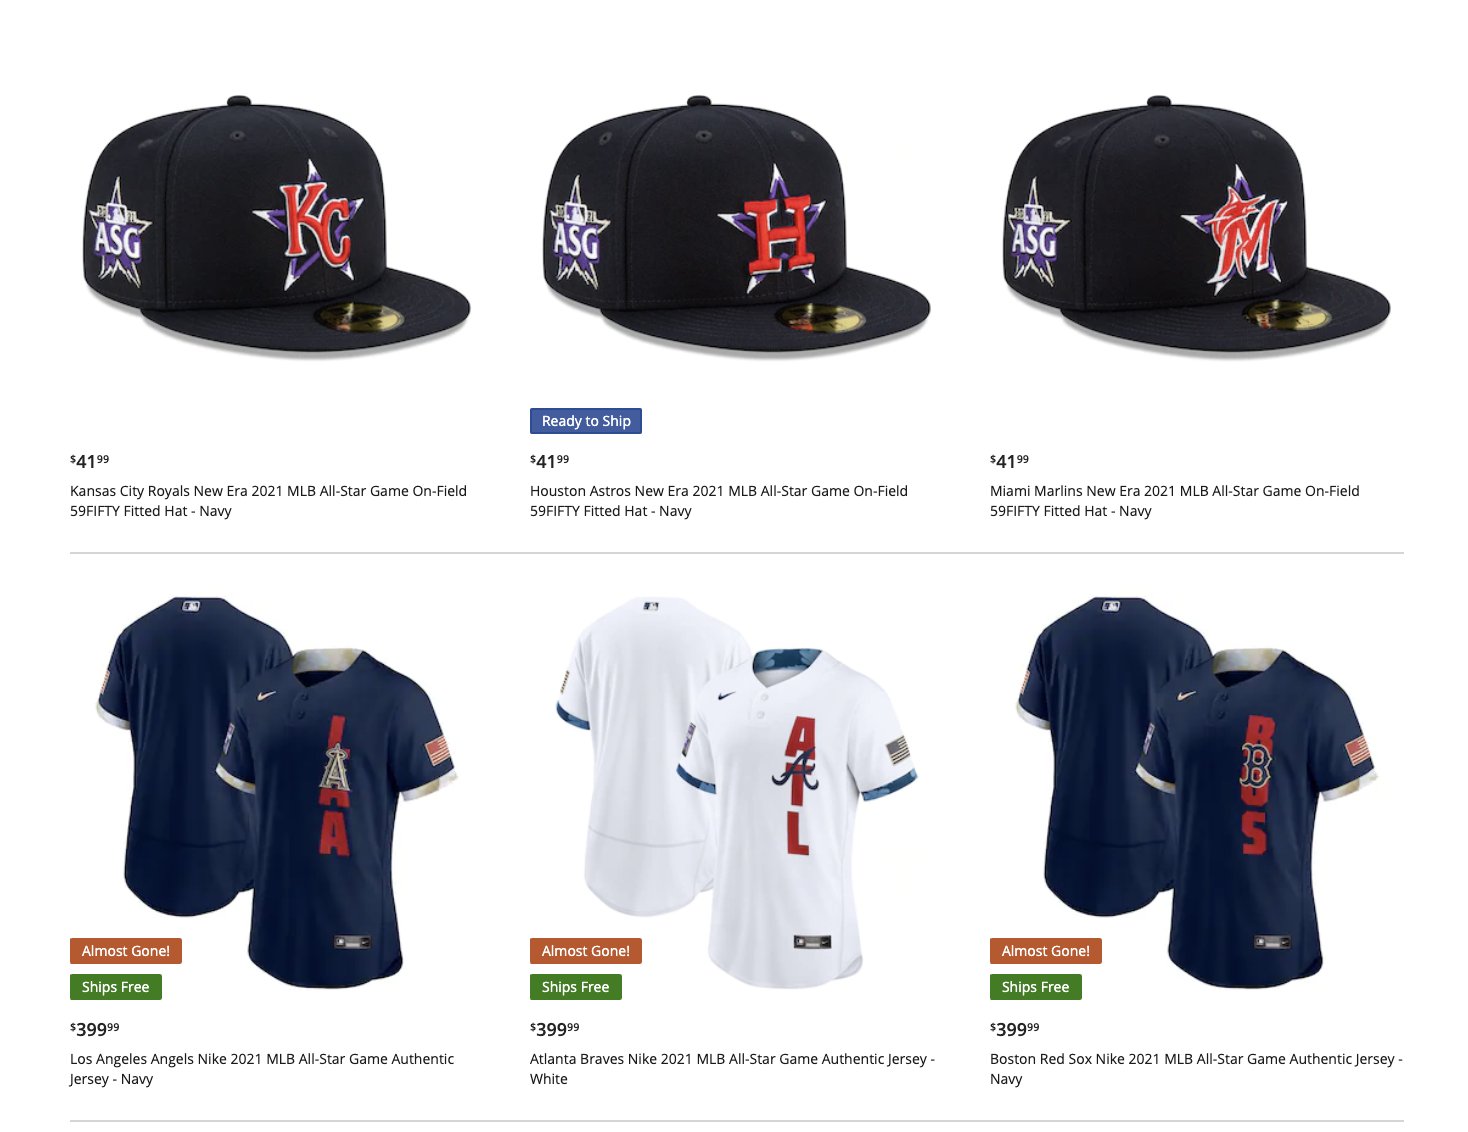 LOOK: Twitter reacts to MLB's 2021 All-Star Game jerseys 